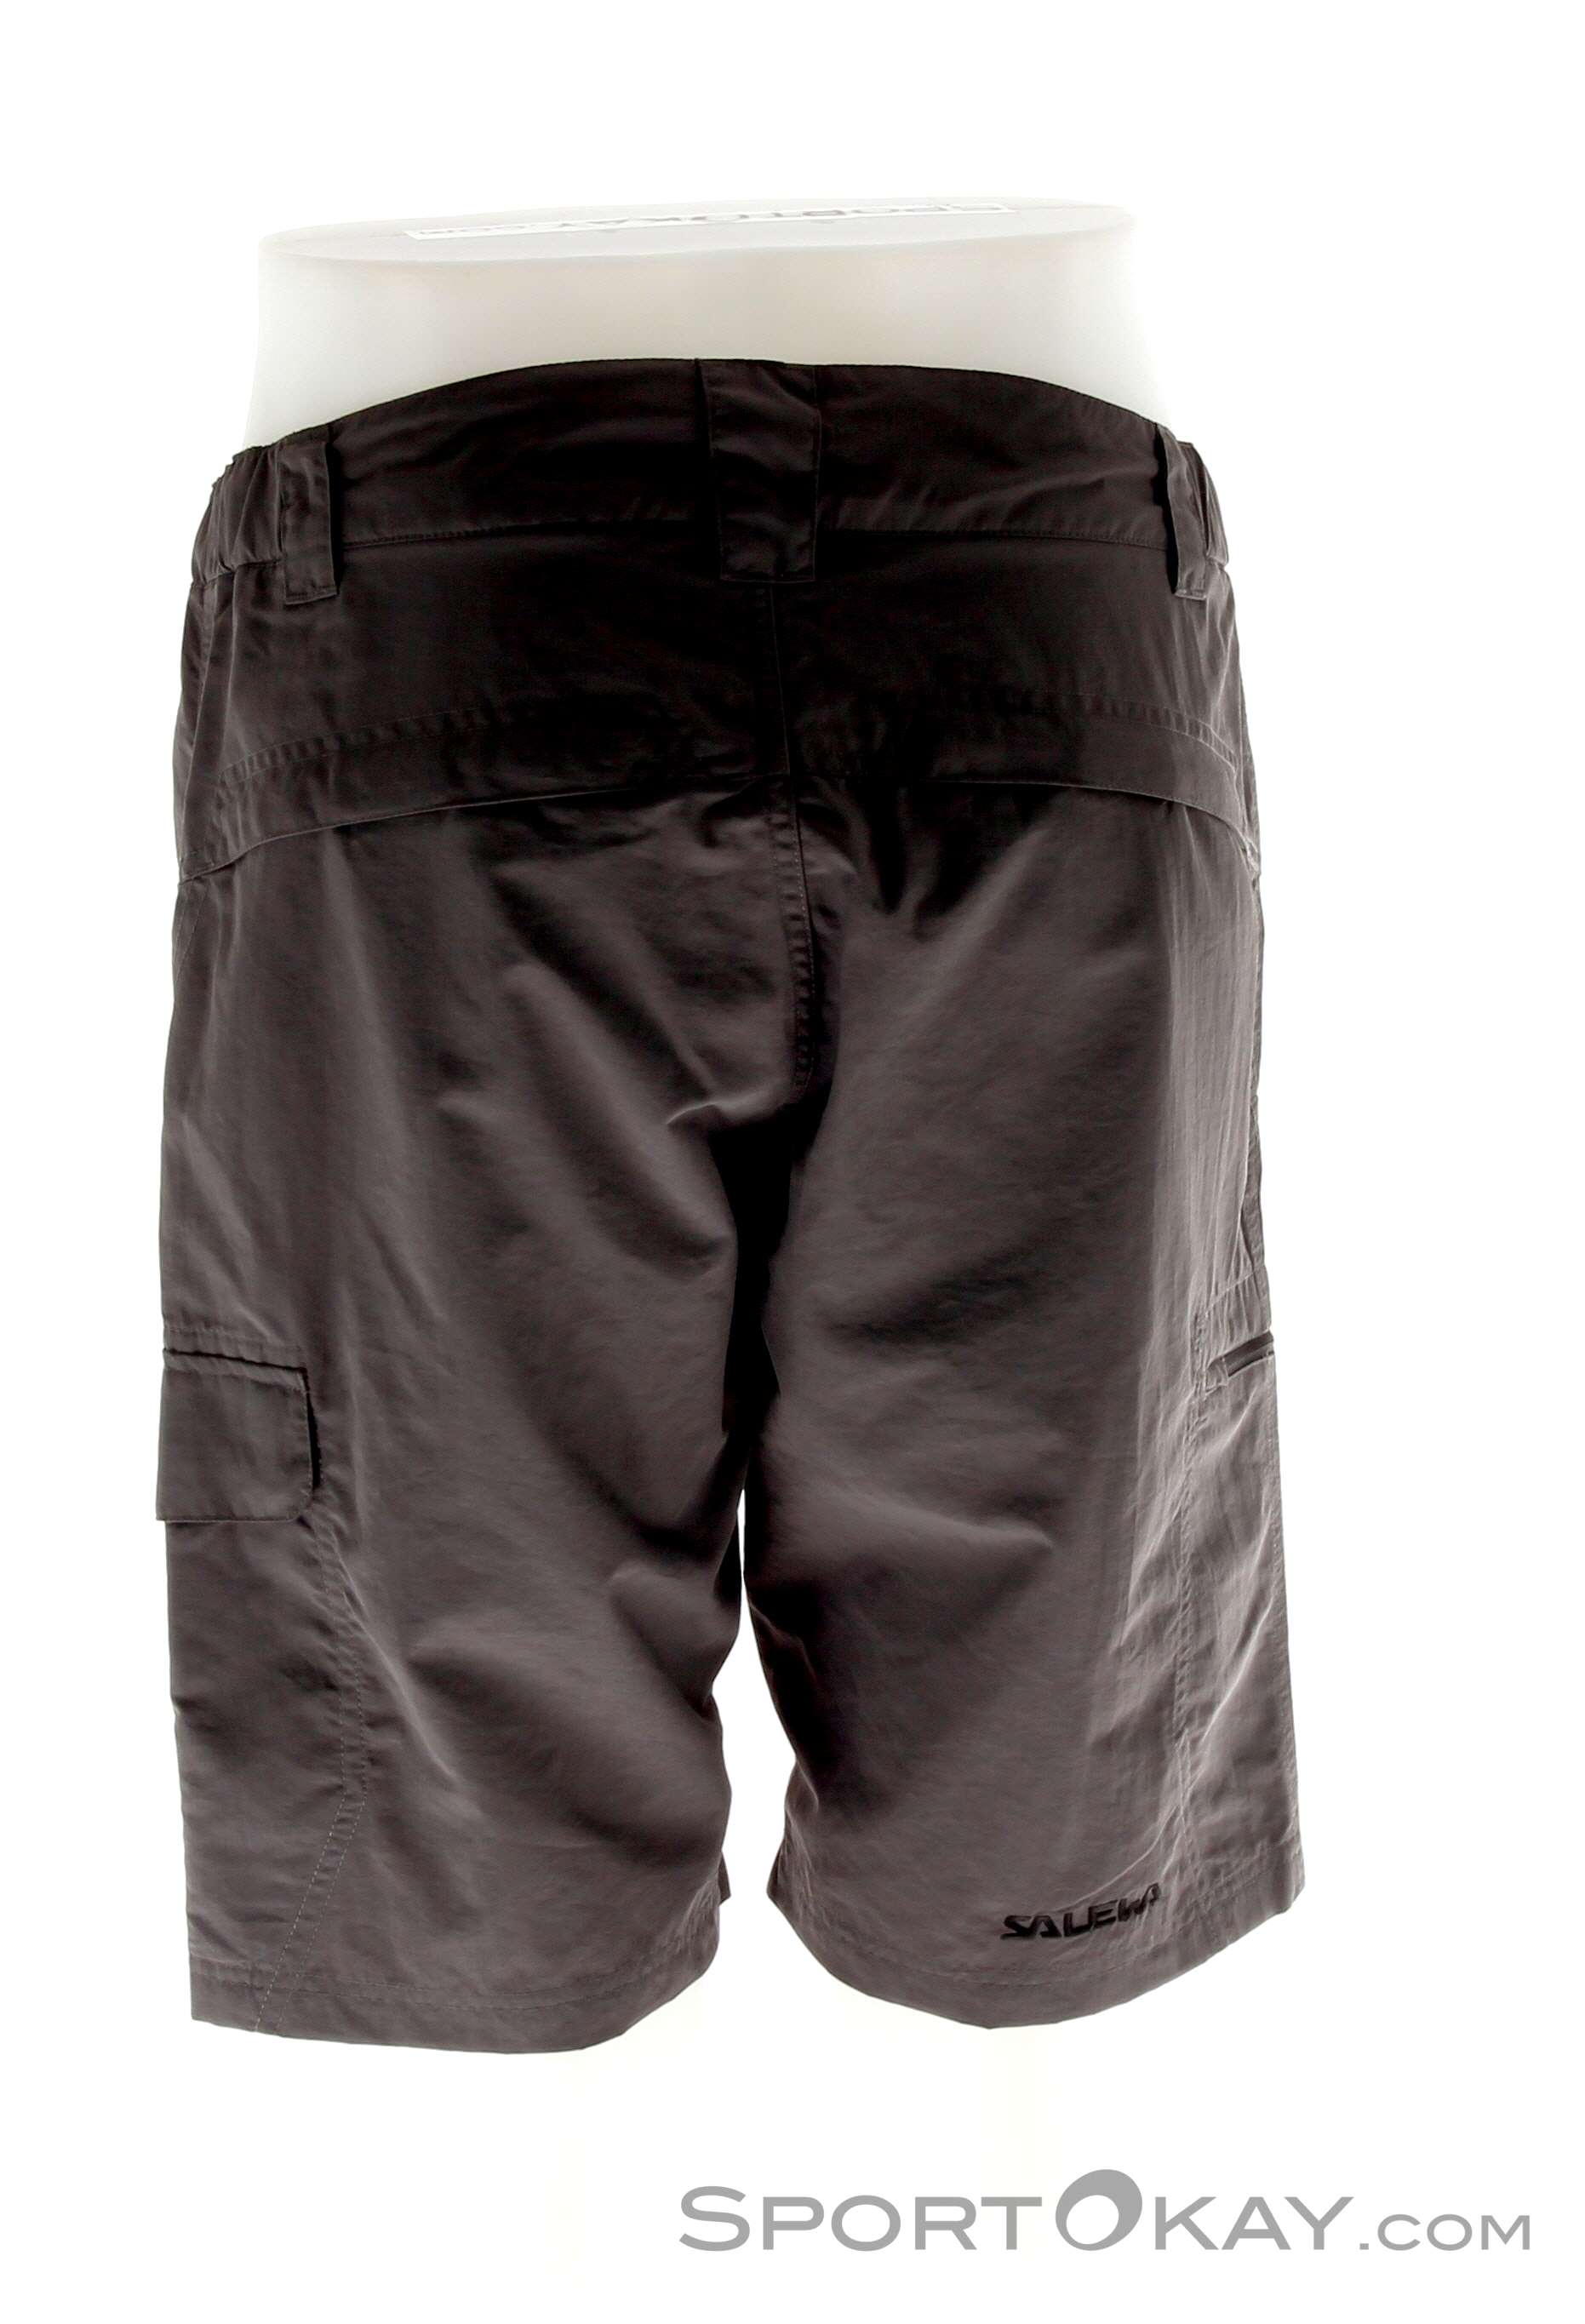 Salewa Fanes Seura 2 Dry Outdoor Pants - Pants - Clothing Outdoor - All